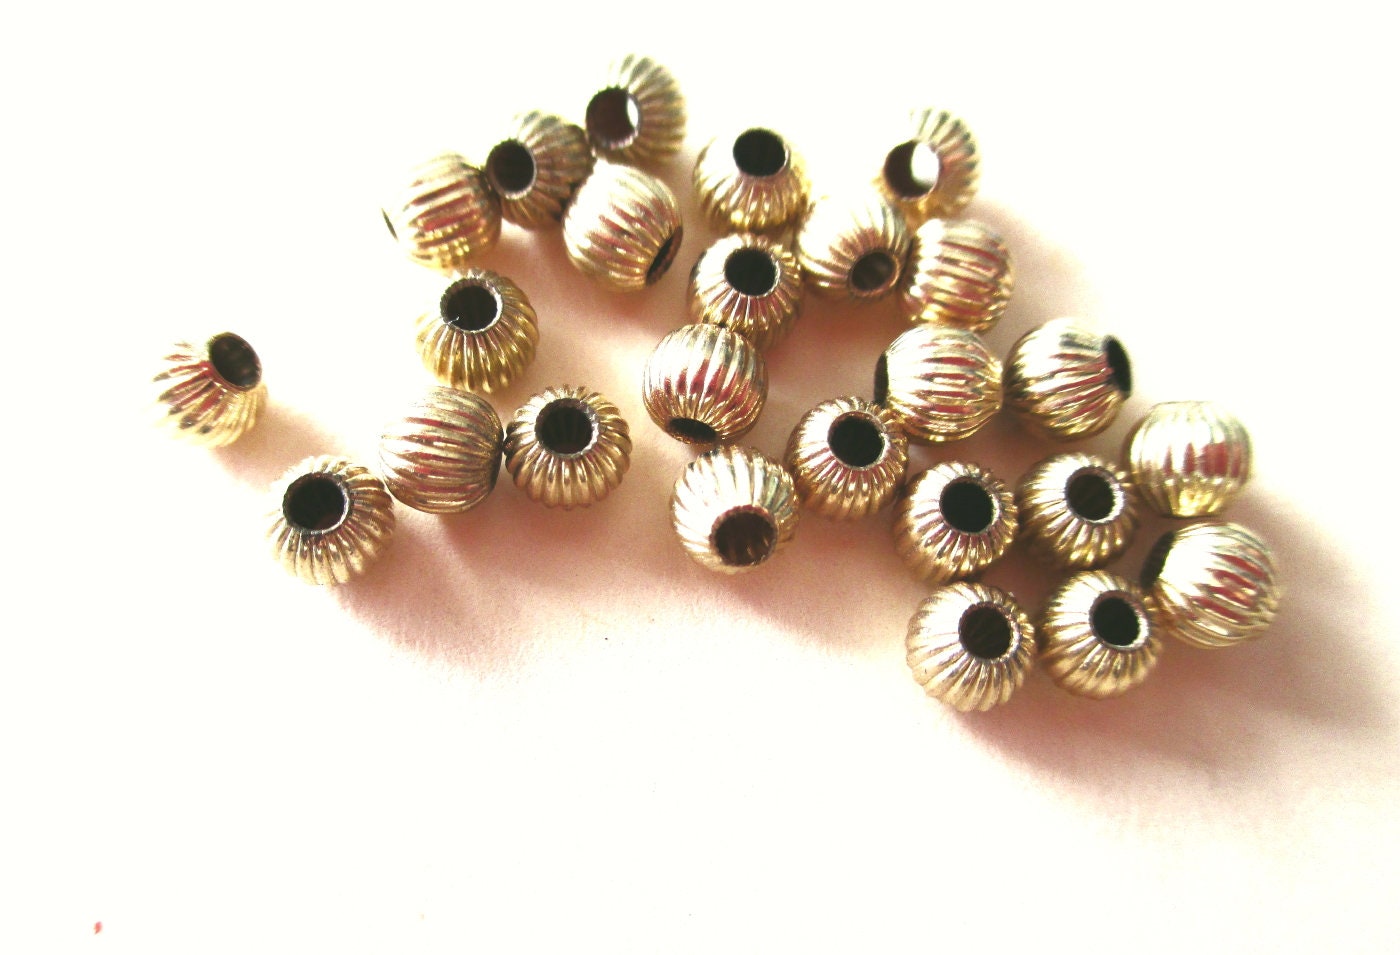 4mm Corrugated-Fluted Round Beads, 14K Gold Filled Beads (10 Pieces)